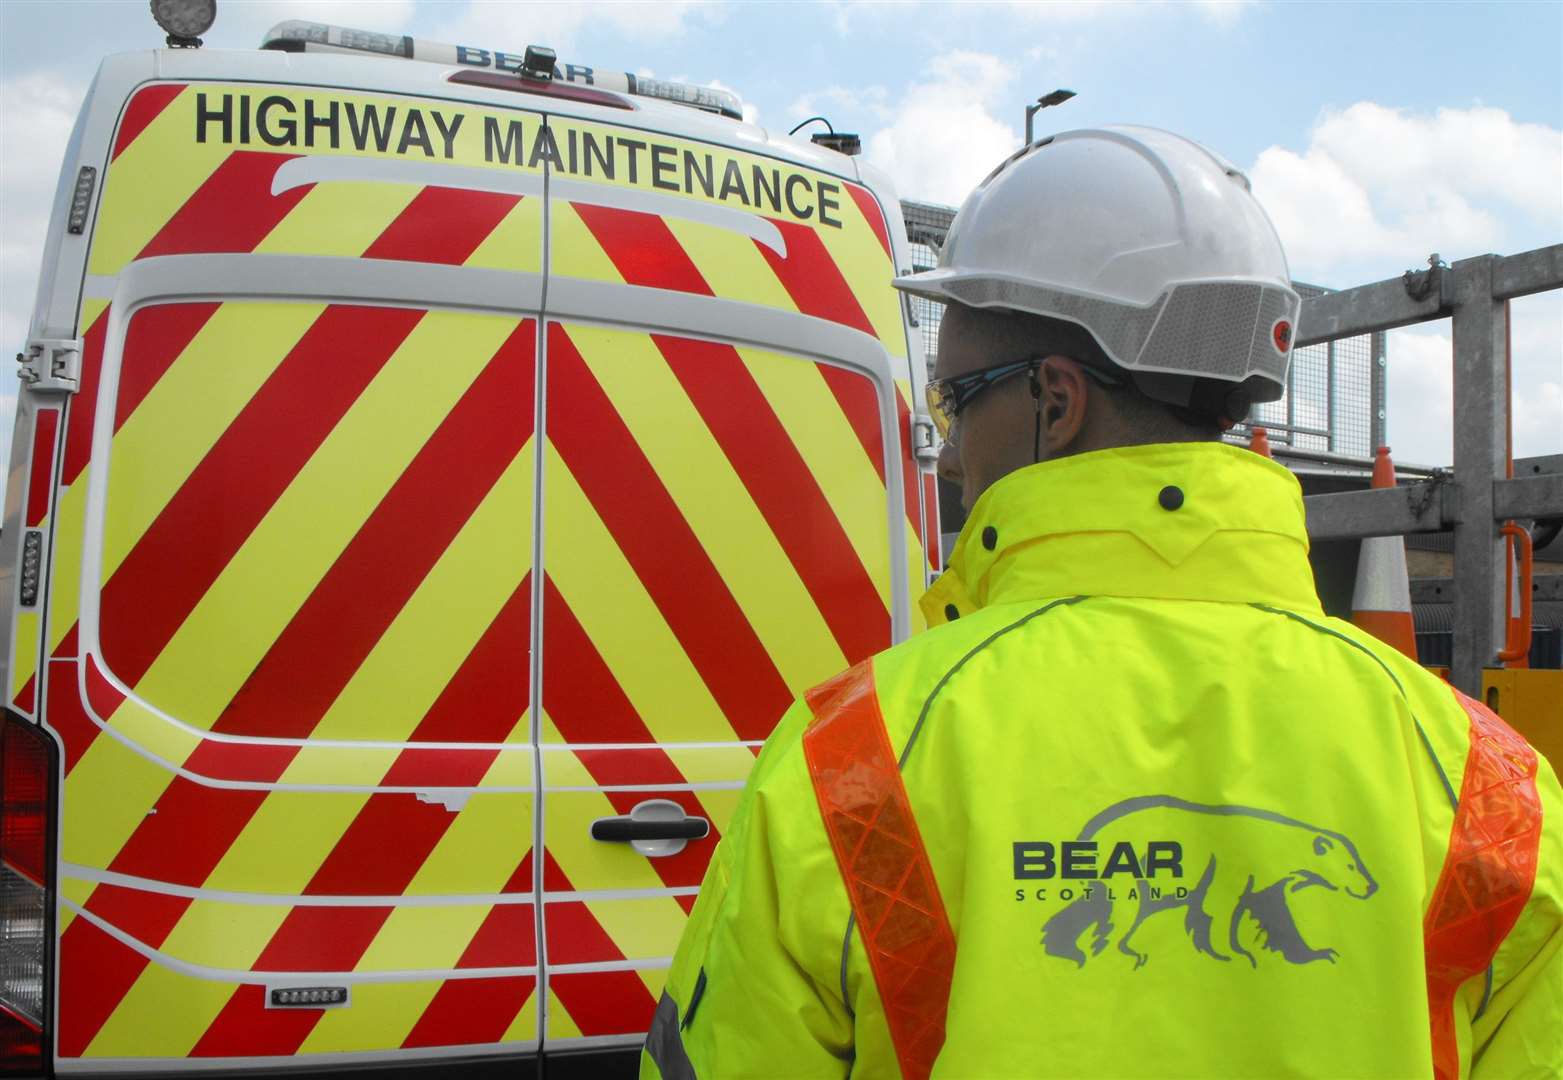 Bear Scotland will carry out the work on the A96 near Huntly next week.